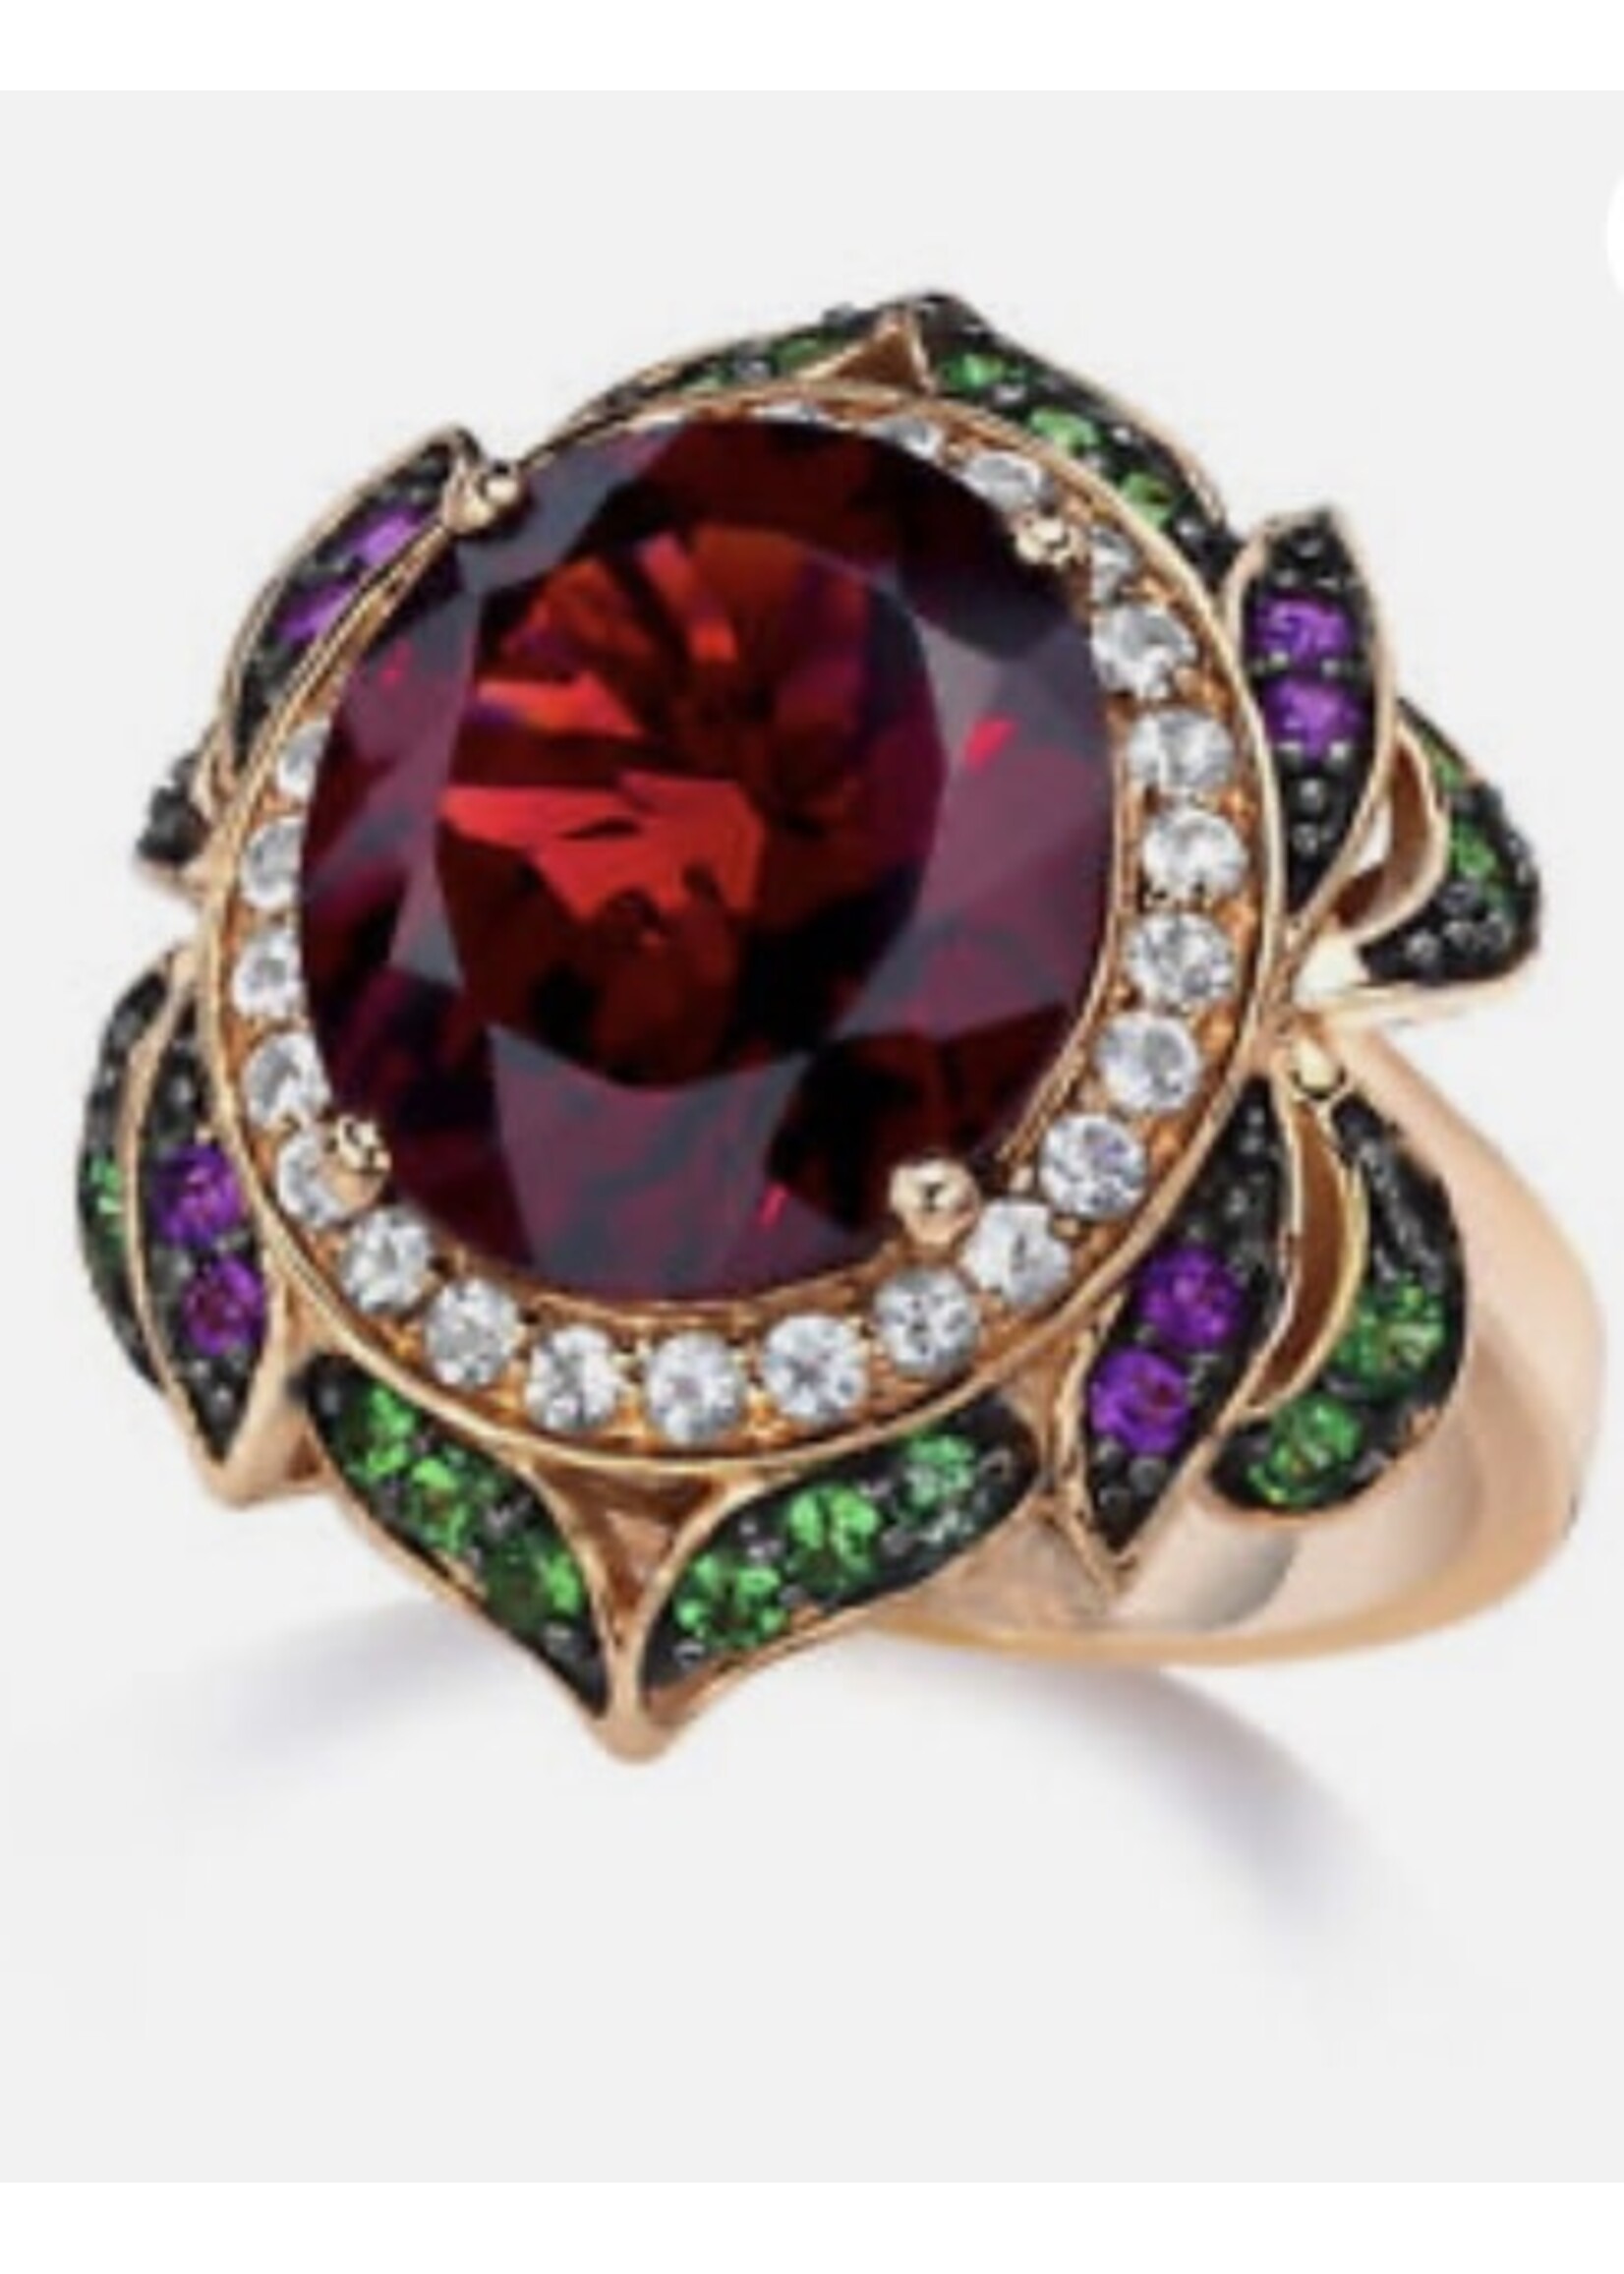 LeVian “Crazy Collection” Ring